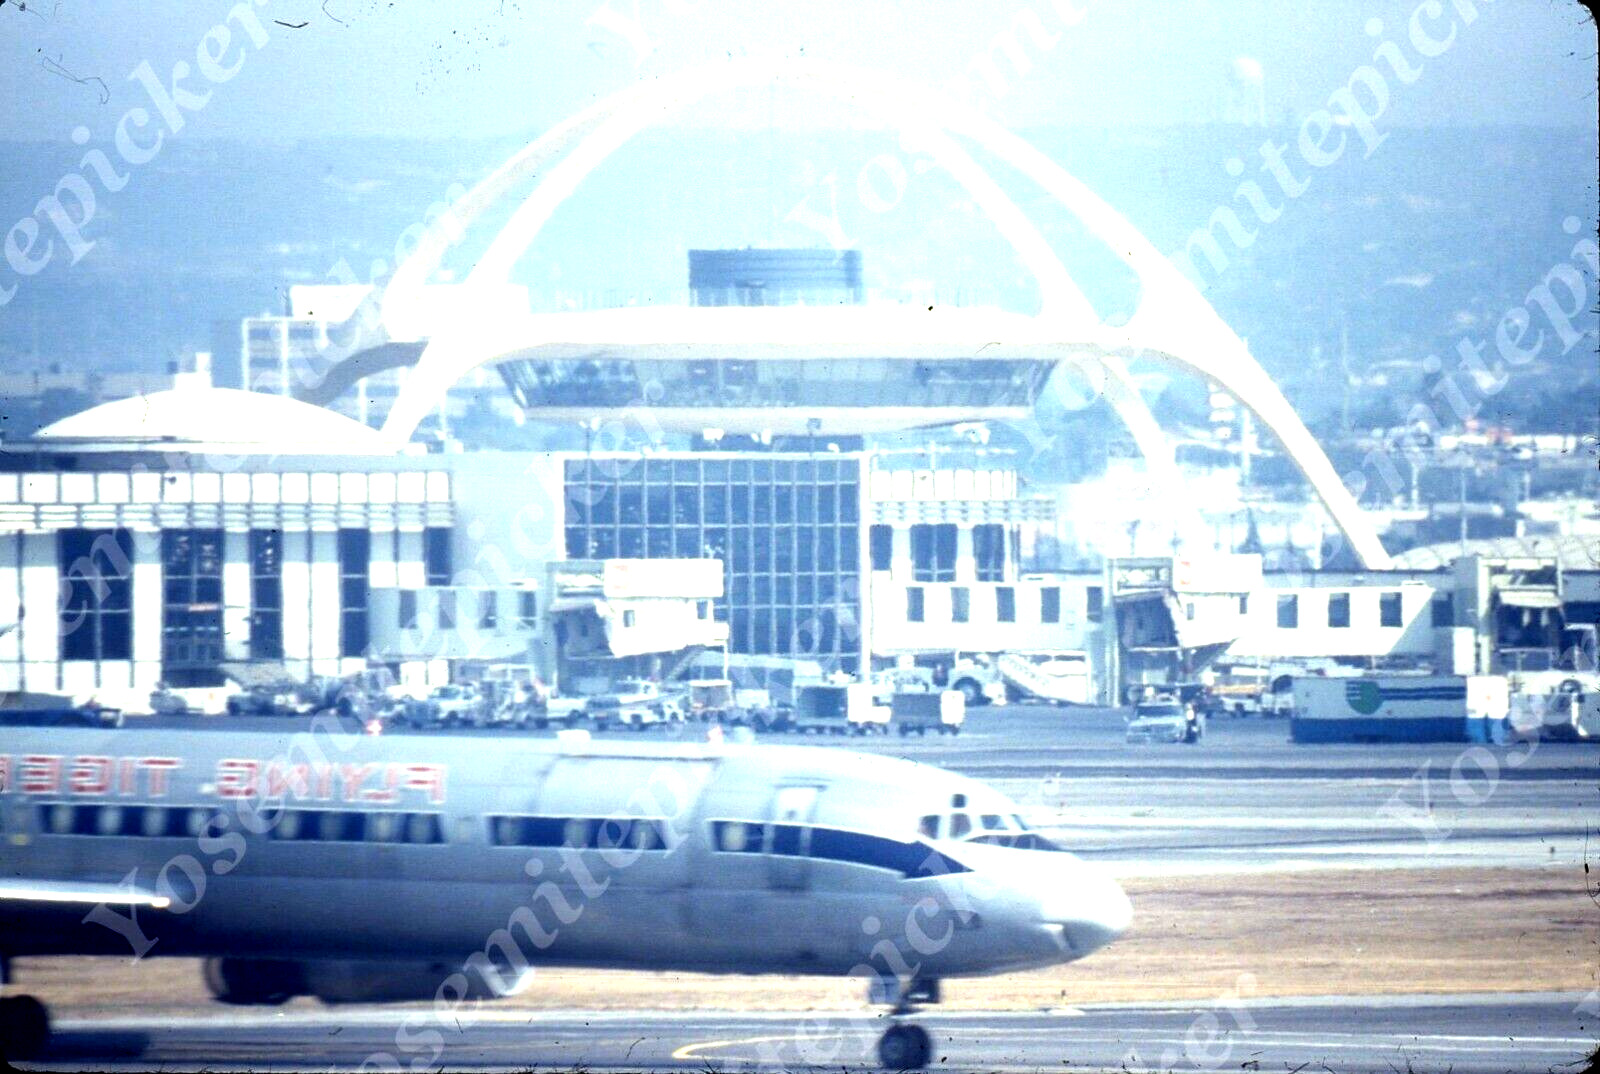 sl46  Original Slide  1981 Flying Tiger Airlines Airplane LAX 191a